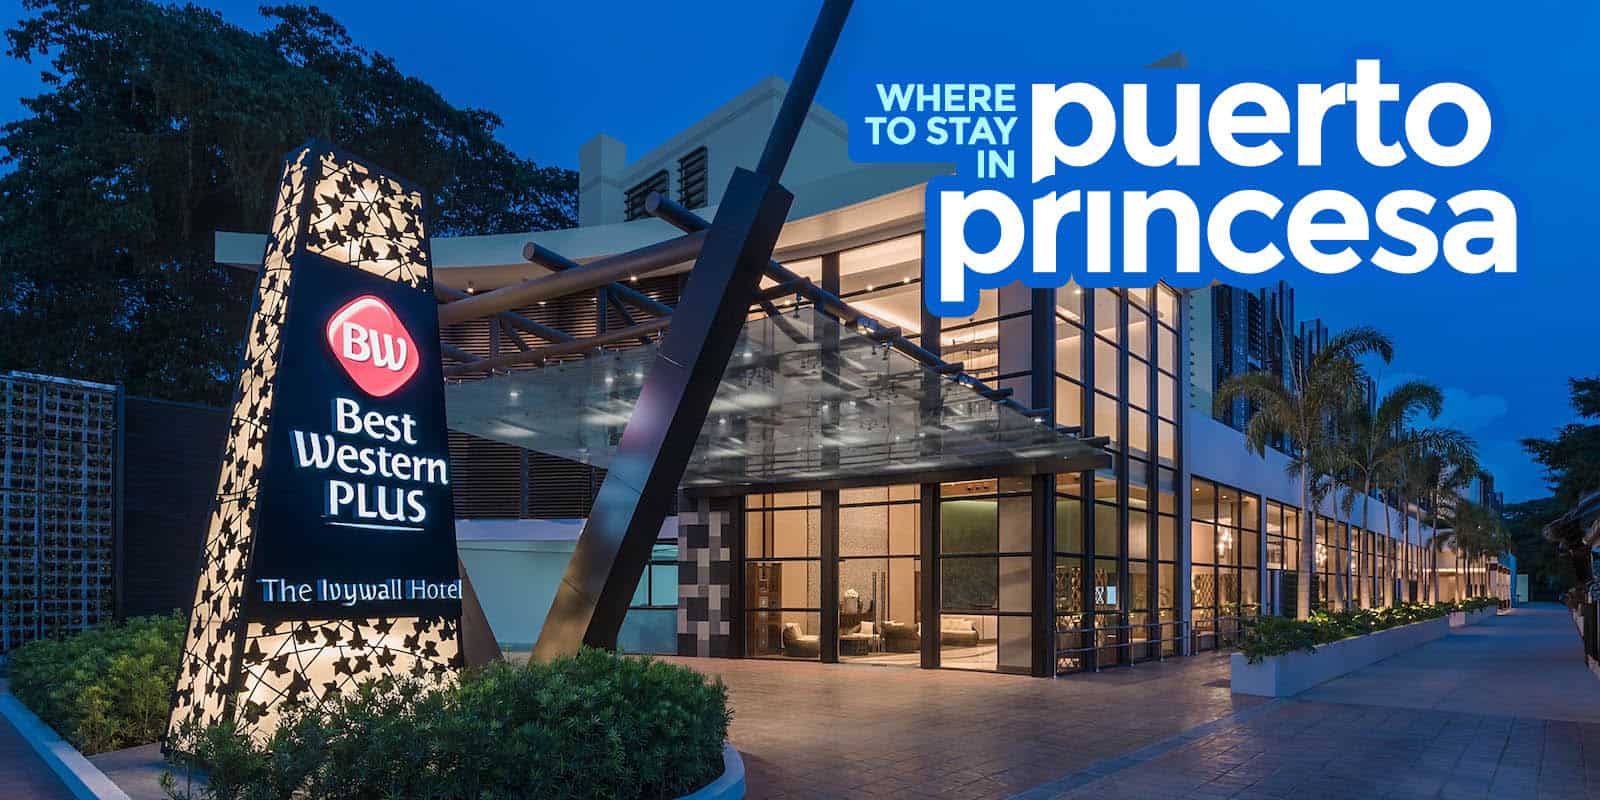 Best Western Plus – The Ivywall Hotel: Where to Stay in Puerto Princesa